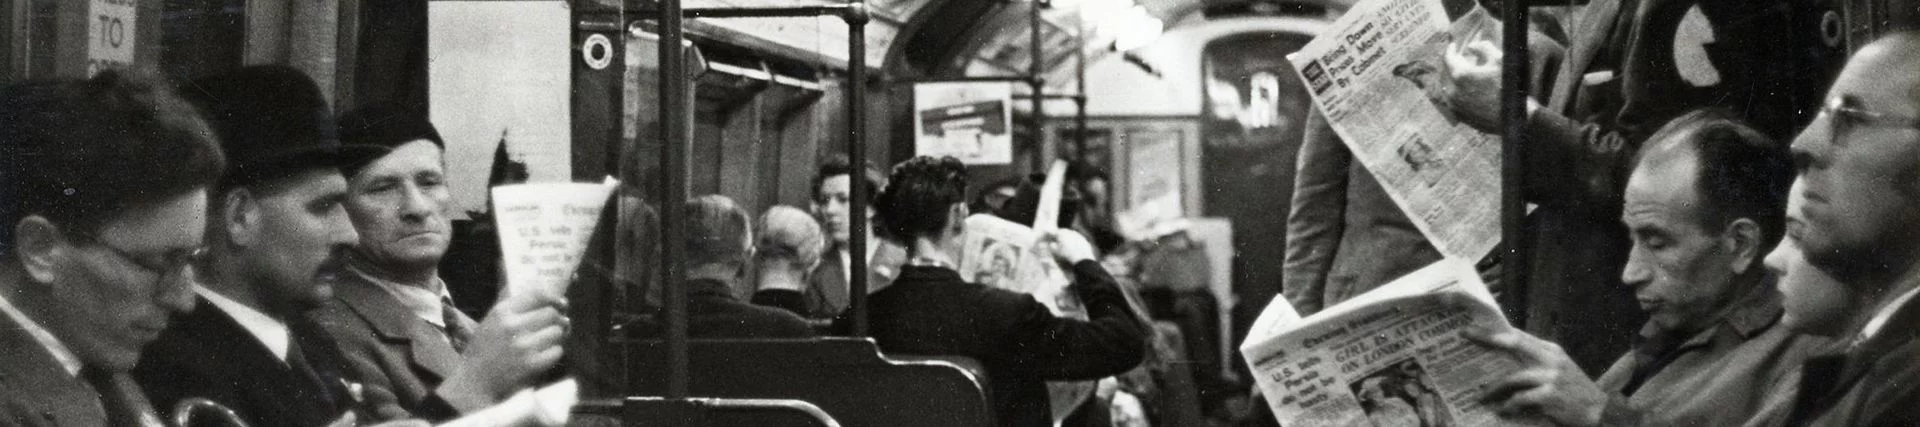 A train carriage full of people reading newspapers